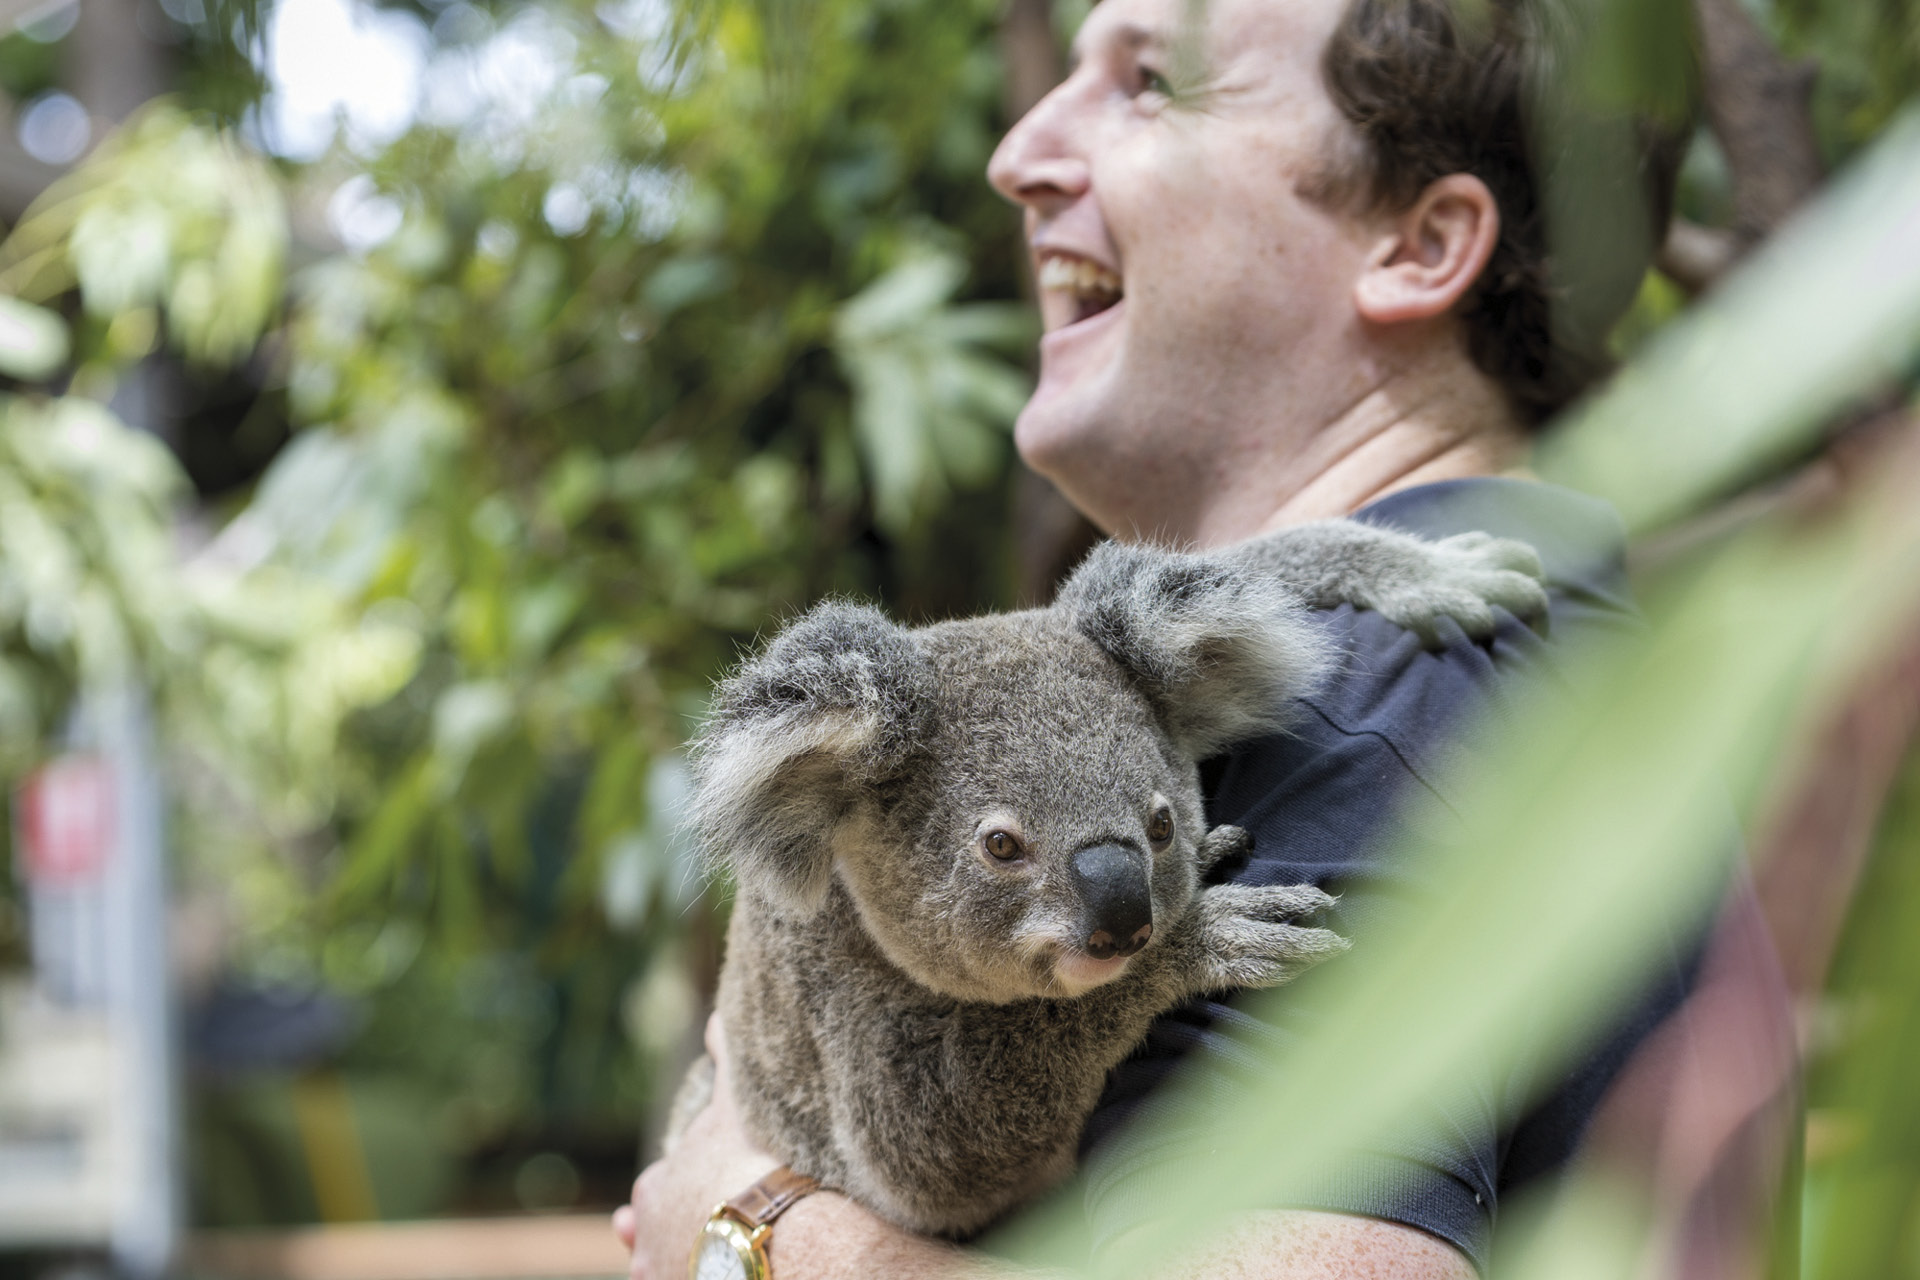 Koala Lovers Club plays starring role in RI public image campaign